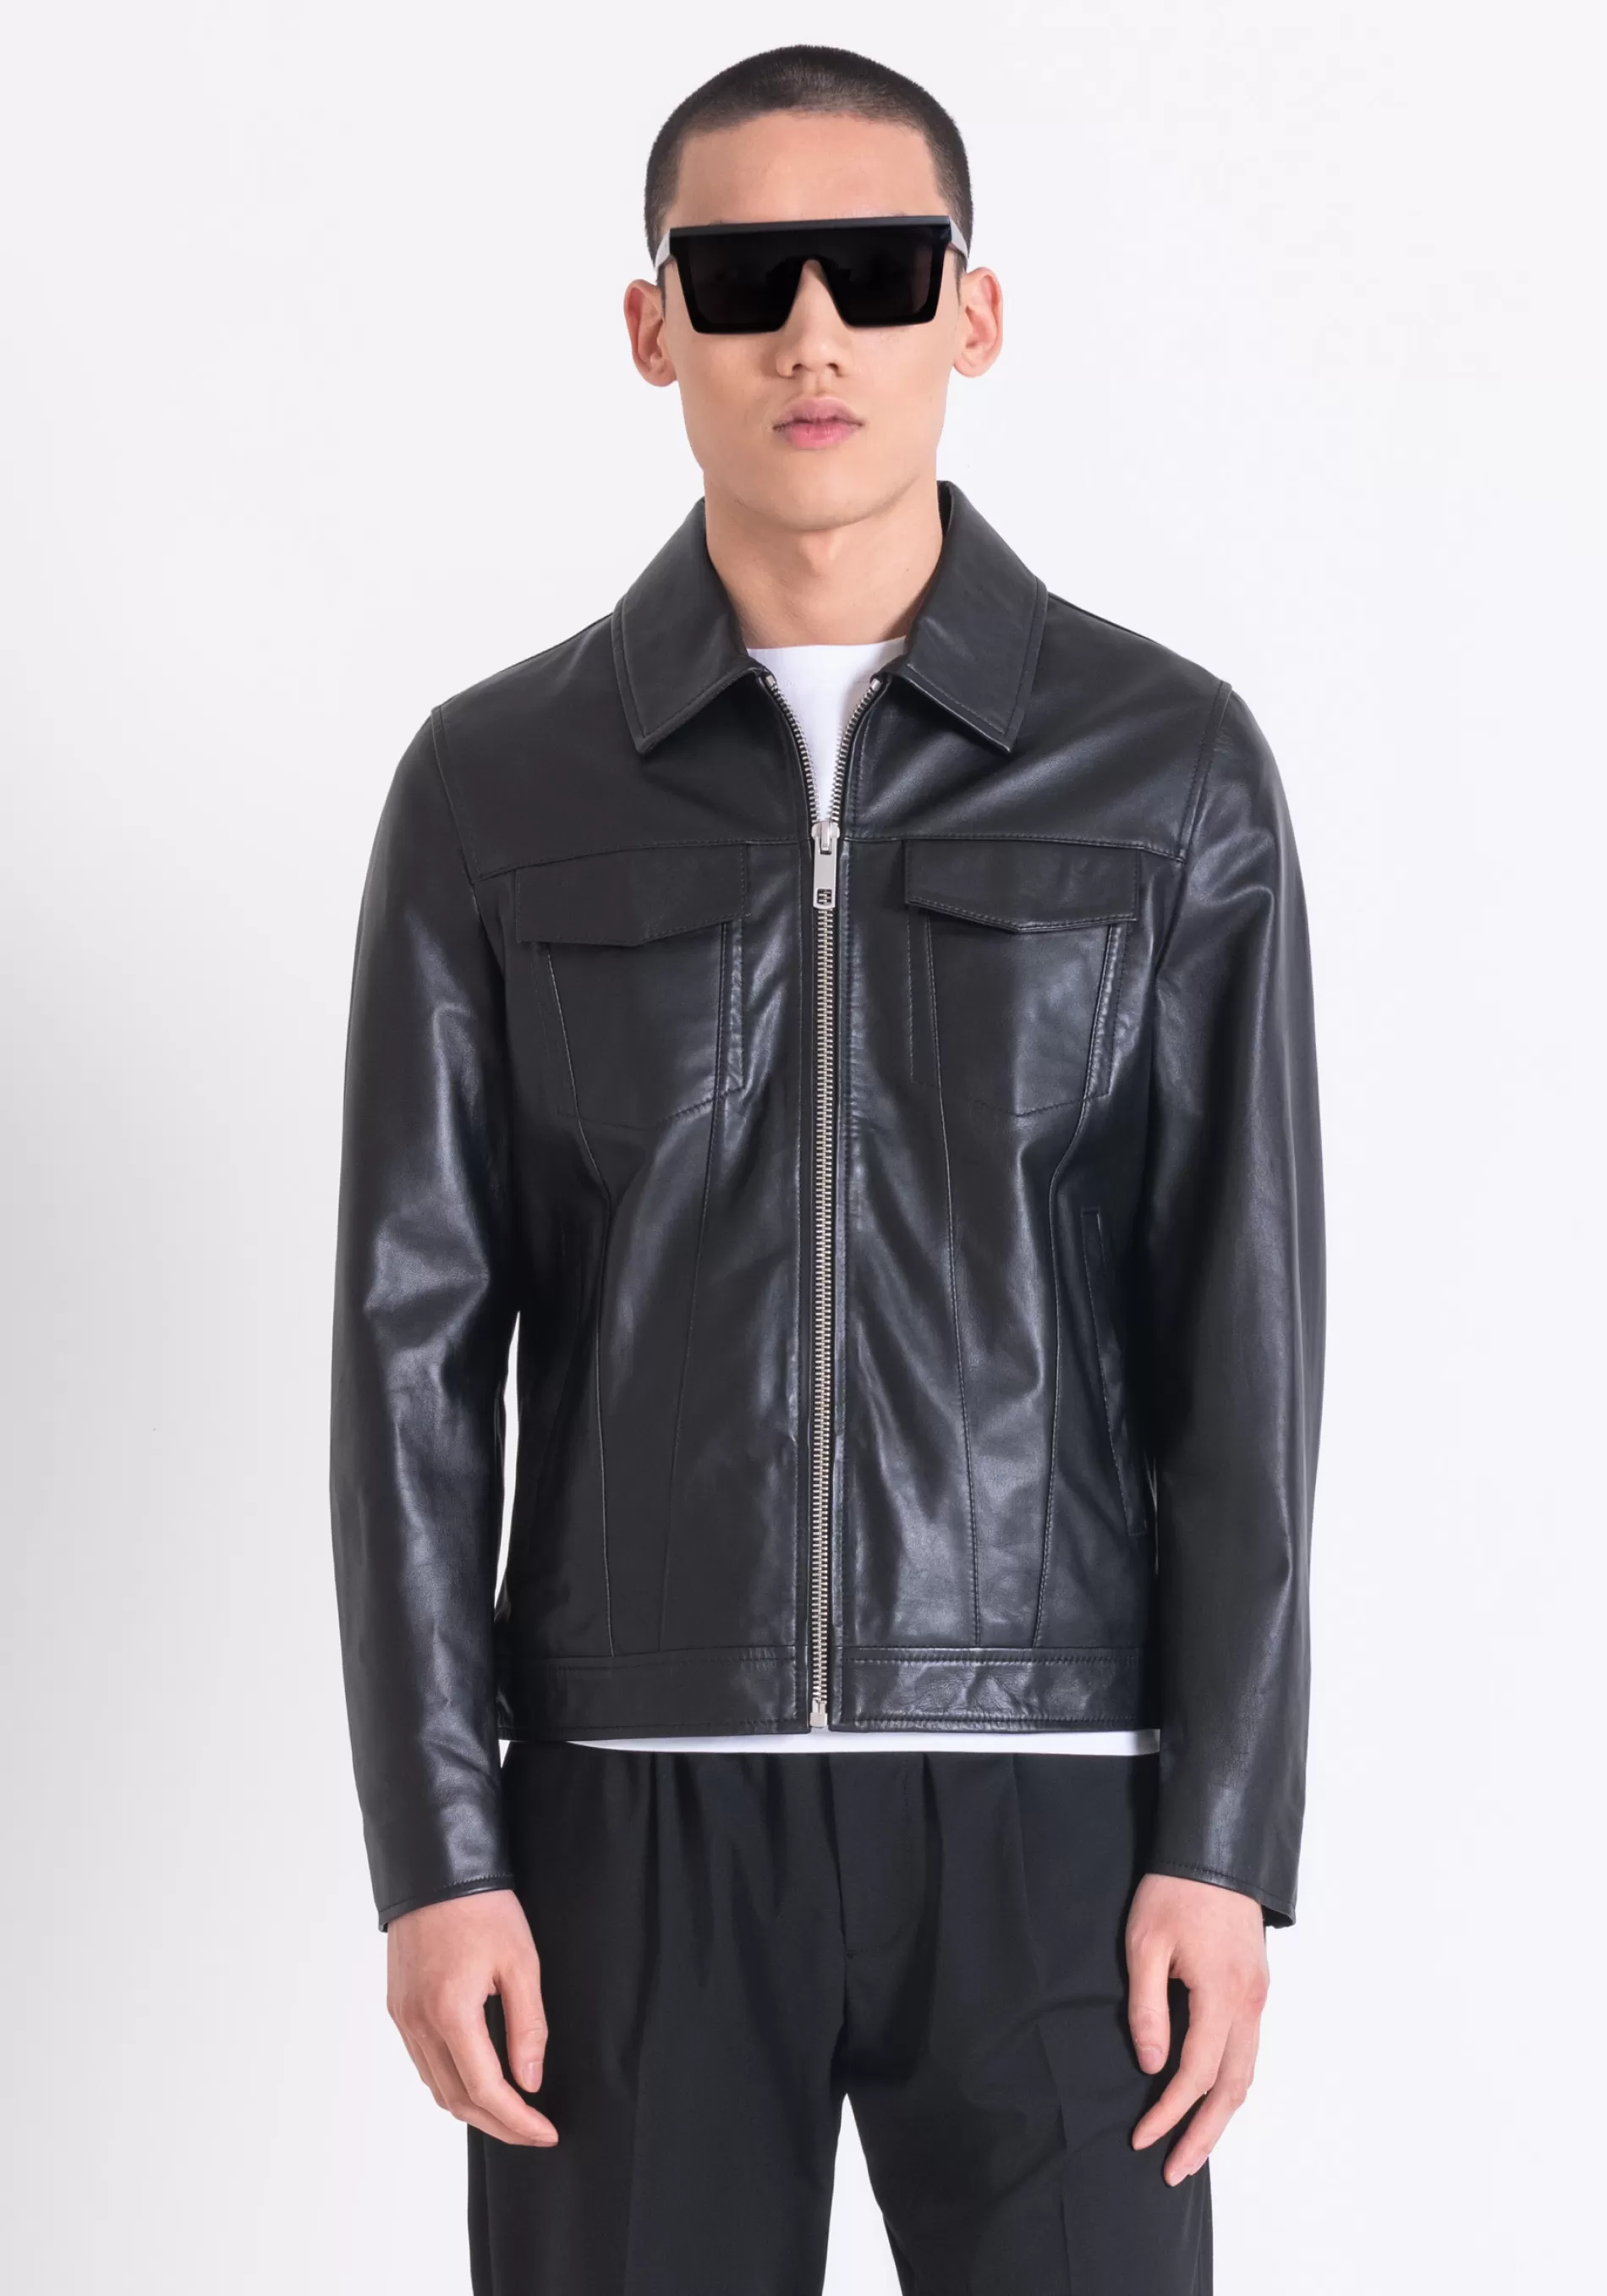 Hot SLIM FIT JACKET IN GENUINE LEATHER Field Jackets and Coats